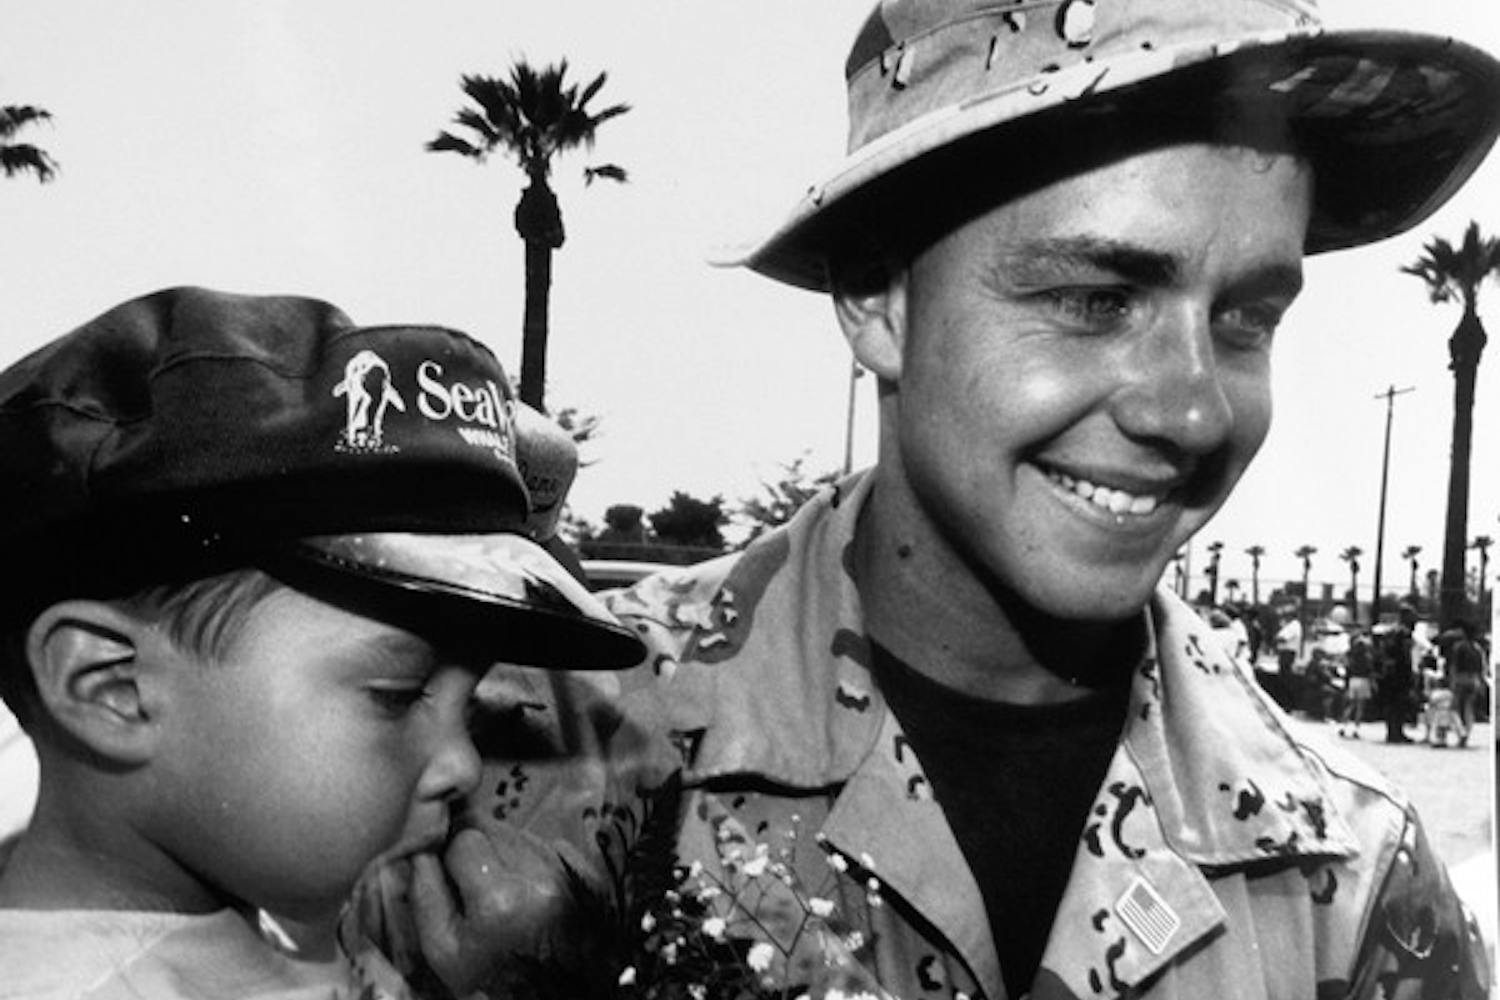 WELCOME HOME: Civil engineering major Lance Corporal Noel Collier is greeted by his three-year-old nephew Jordan Garcia in 1991. Collier was in the gulf for six months. (Photo by Irwin Daugherty)